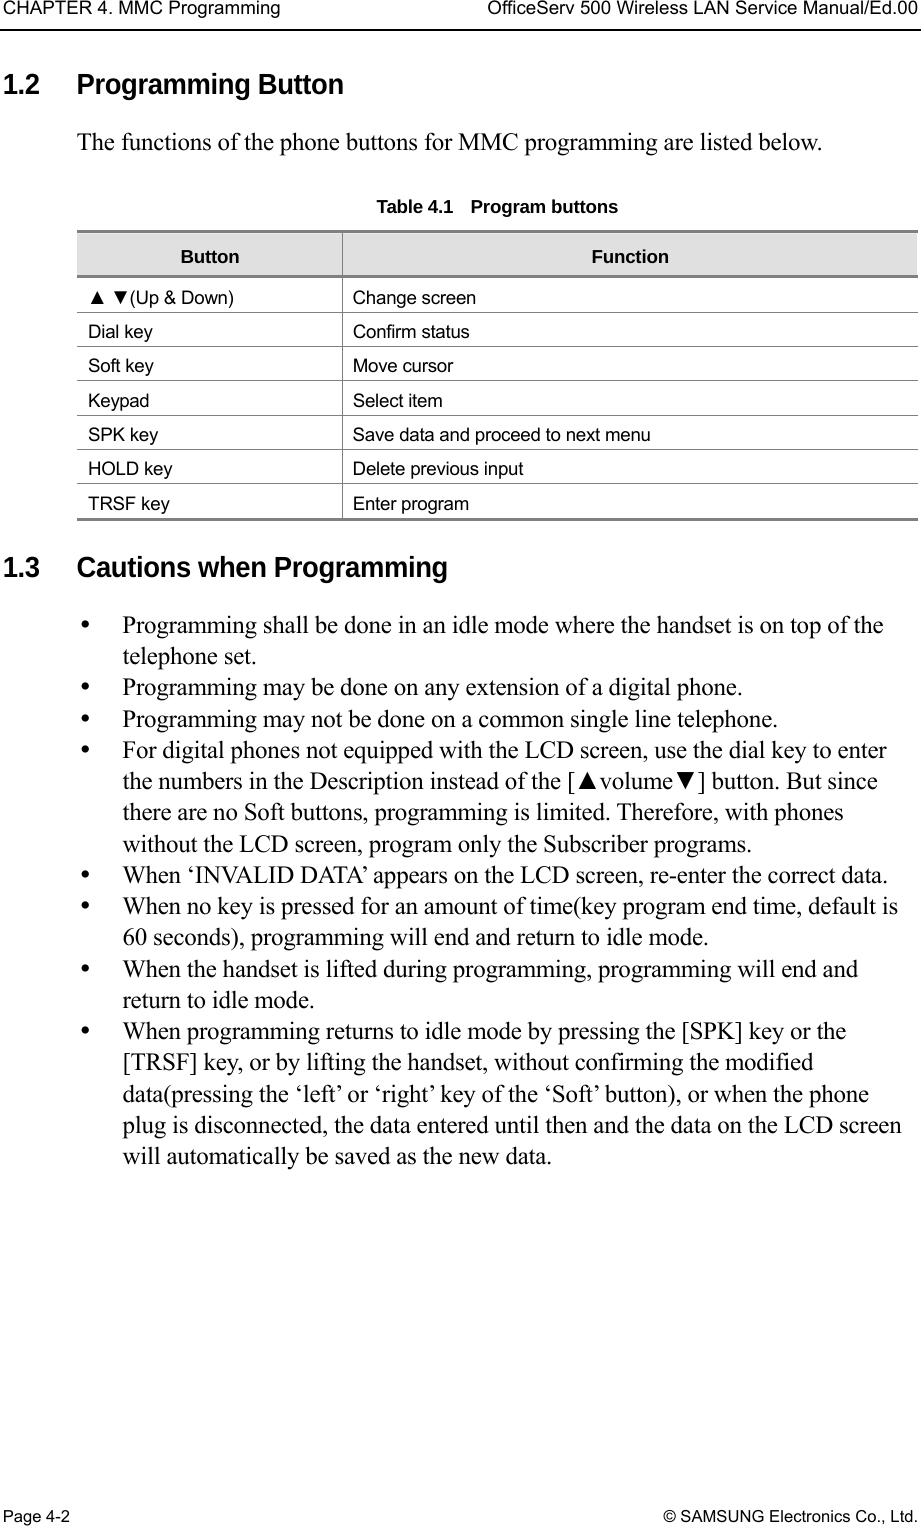 CHAPTER 4. MMC Programming  OfficeServ 500 Wireless LAN Service Manual/Ed.00 Page 4-2 © SAMSUNG Electronics Co., Ltd. 1.2 Programming Button The functions of the phone buttons for MMC programming are listed below.    Table 4.1  Program buttons Button  Function ▲ ▼(Up &amp; Down)  Change screen Dial key  Confirm status Soft key  Move cursor Keypad Select item SPK key  Save data and proceed to next menu HOLD key  Delete previous input TRSF key  Enter program  1.3  Cautions when Programming   Programming shall be done in an idle mode where the handset is on top of the telephone set.   Programming may be done on any extension of a digital phone.   Programming may not be done on a common single line telephone.   For digital phones not equipped with the LCD screen, use the dial key to enter the numbers in the Description instead of the [▲volume▼] button. But since there are no Soft buttons, programming is limited. Therefore, with phones without the LCD screen, program only the Subscriber programs.   When ‘INVALID DATA’ appears on the LCD screen, re-enter the correct data.   When no key is pressed for an amount of time(key program end time, default is 60 seconds), programming will end and return to idle mode.     When the handset is lifted during programming, programming will end and return to idle mode.   When programming returns to idle mode by pressing the [SPK] key or the [TRSF] key, or by lifting the handset, without confirming the modified data(pressing the ‘left’ or ‘right’ key of the ‘Soft’ button), or when the phone plug is disconnected, the data entered until then and the data on the LCD screen will automatically be saved as the new data.  